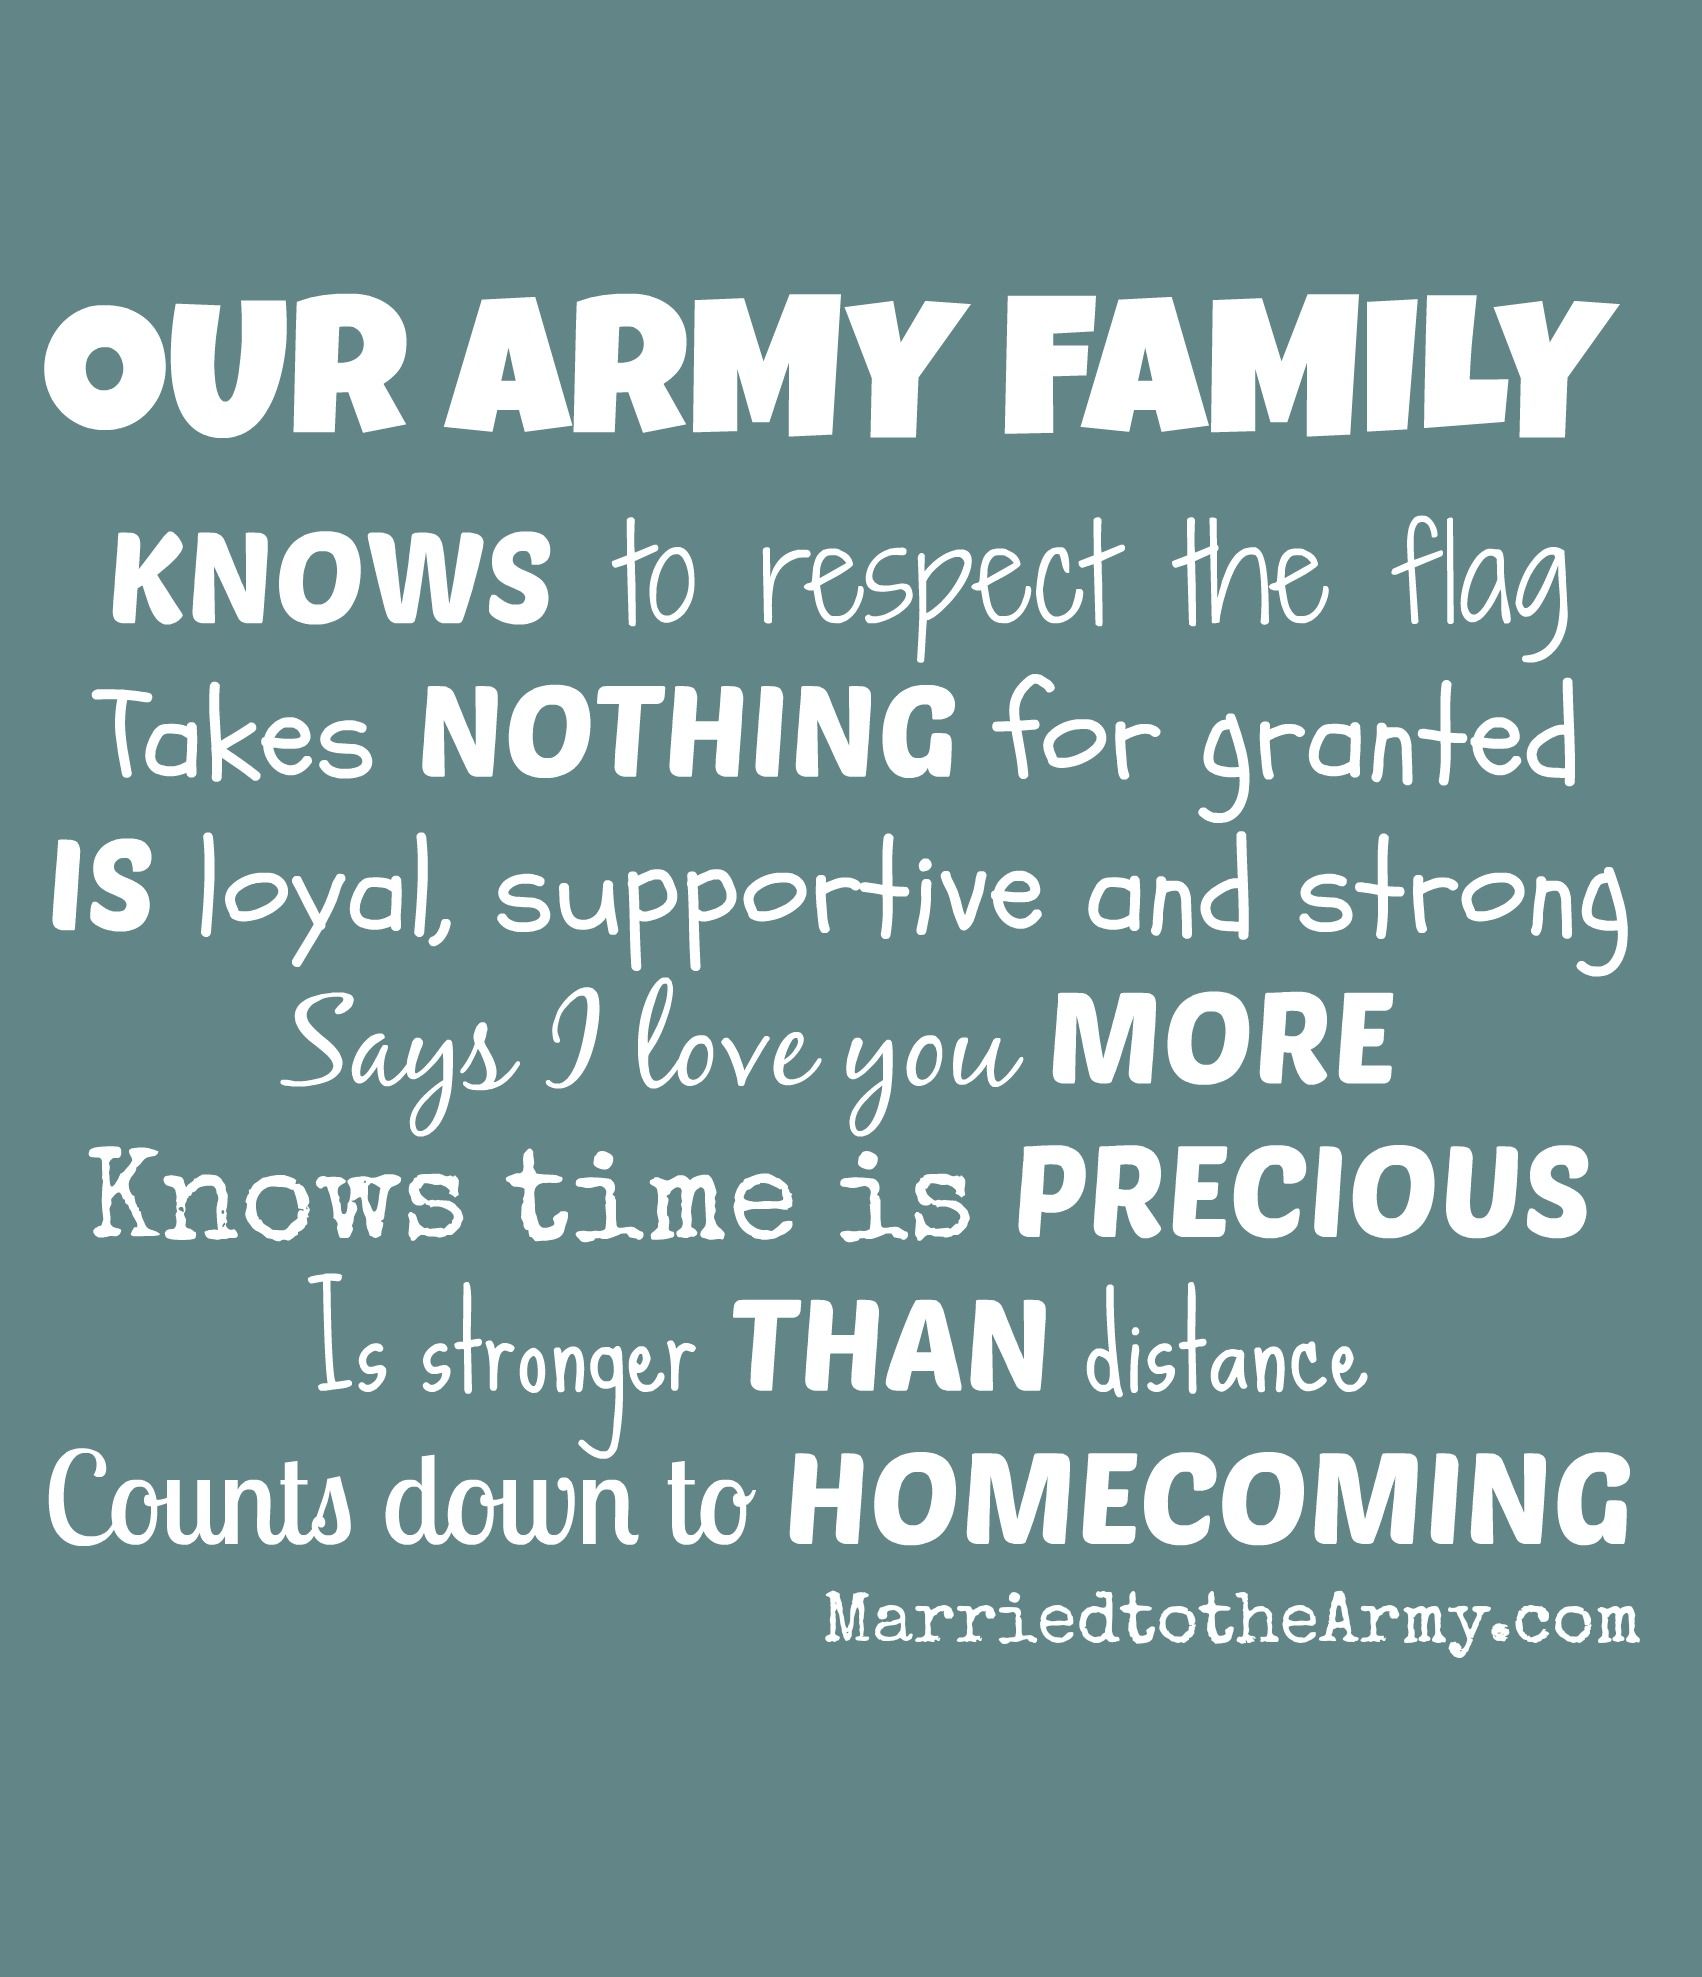 Married to the Army: Resources and Support for Military Spouses and Families